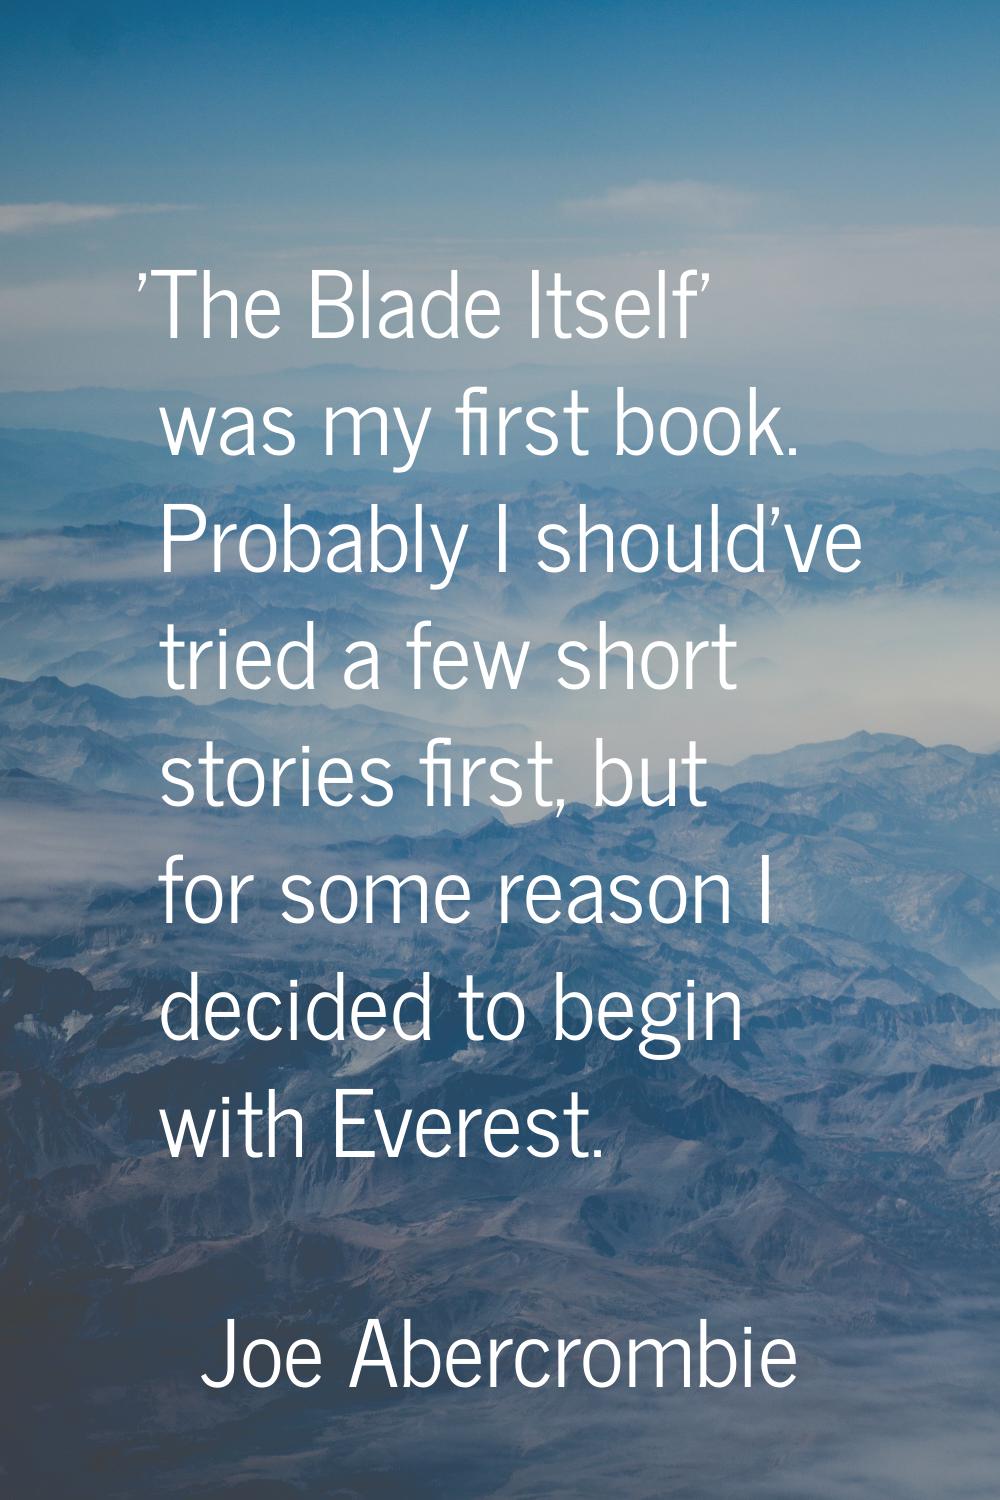 'The Blade Itself' was my first book. Probably I should've tried a few short stories first, but for